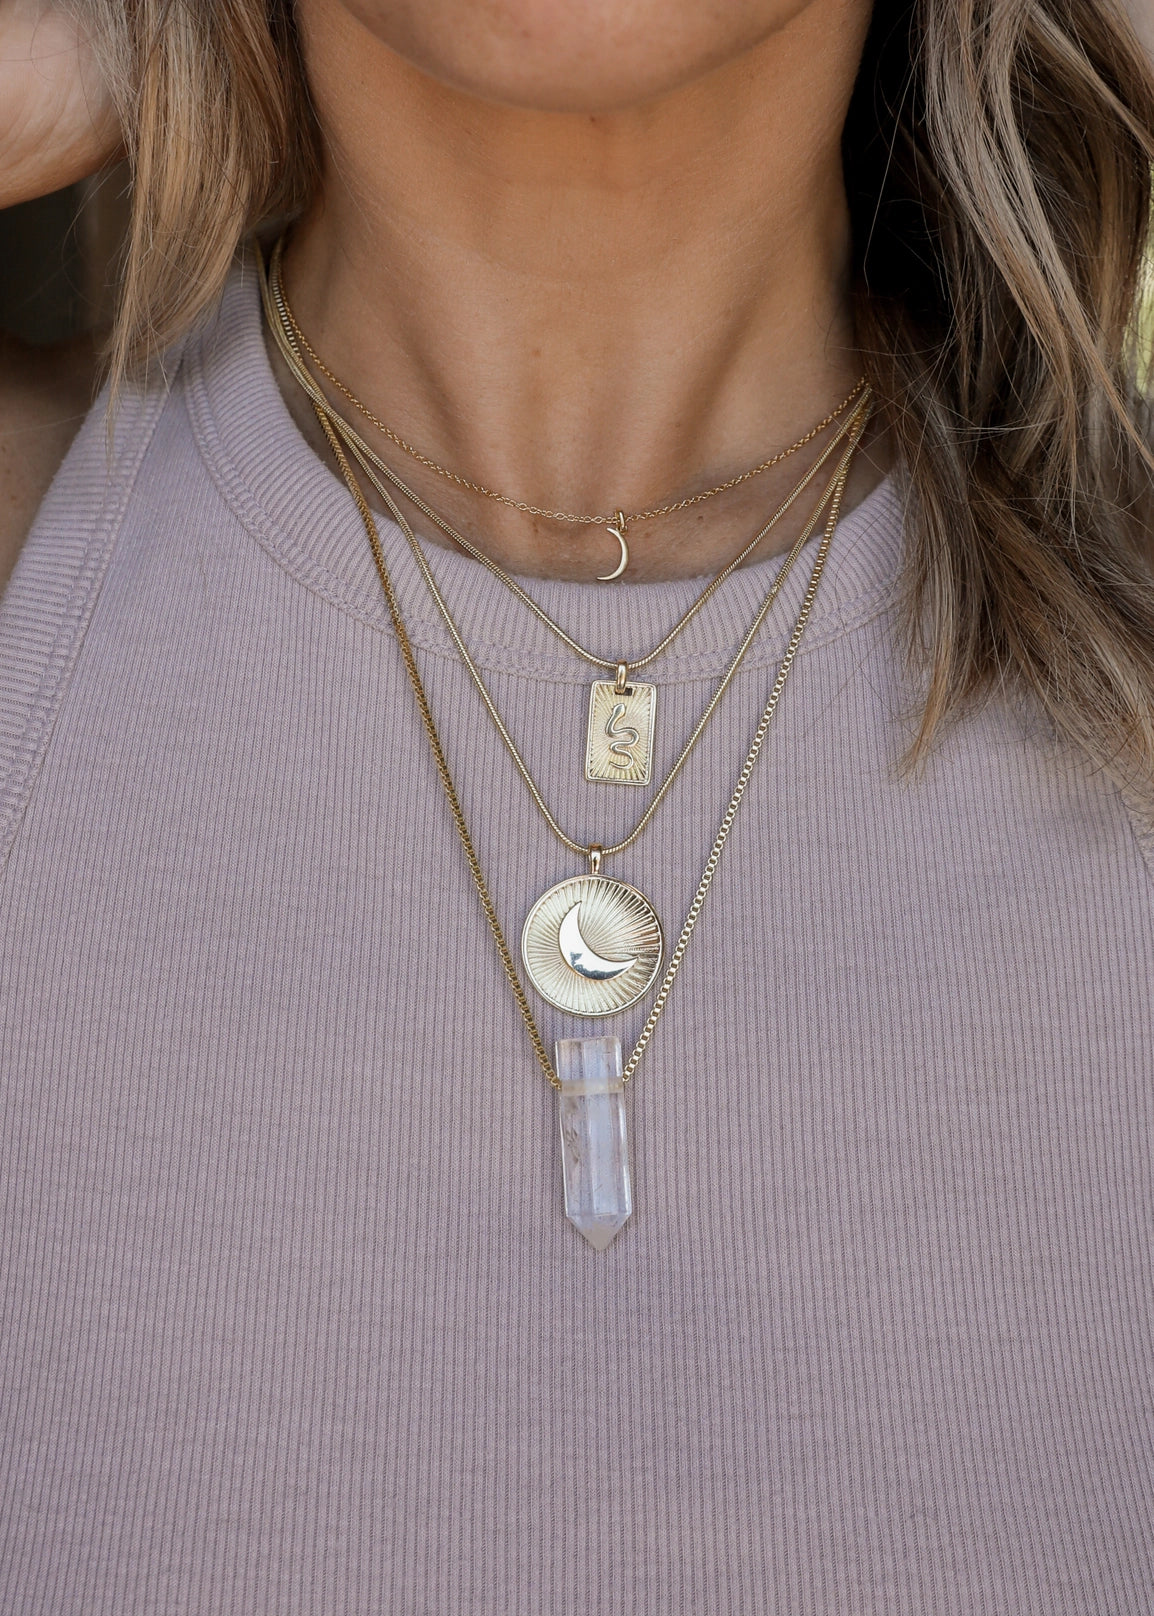 Clear Quartz Pendant- Snake Chain Necklace 18kt gold plated brass - Moon Room Shop and Wellness